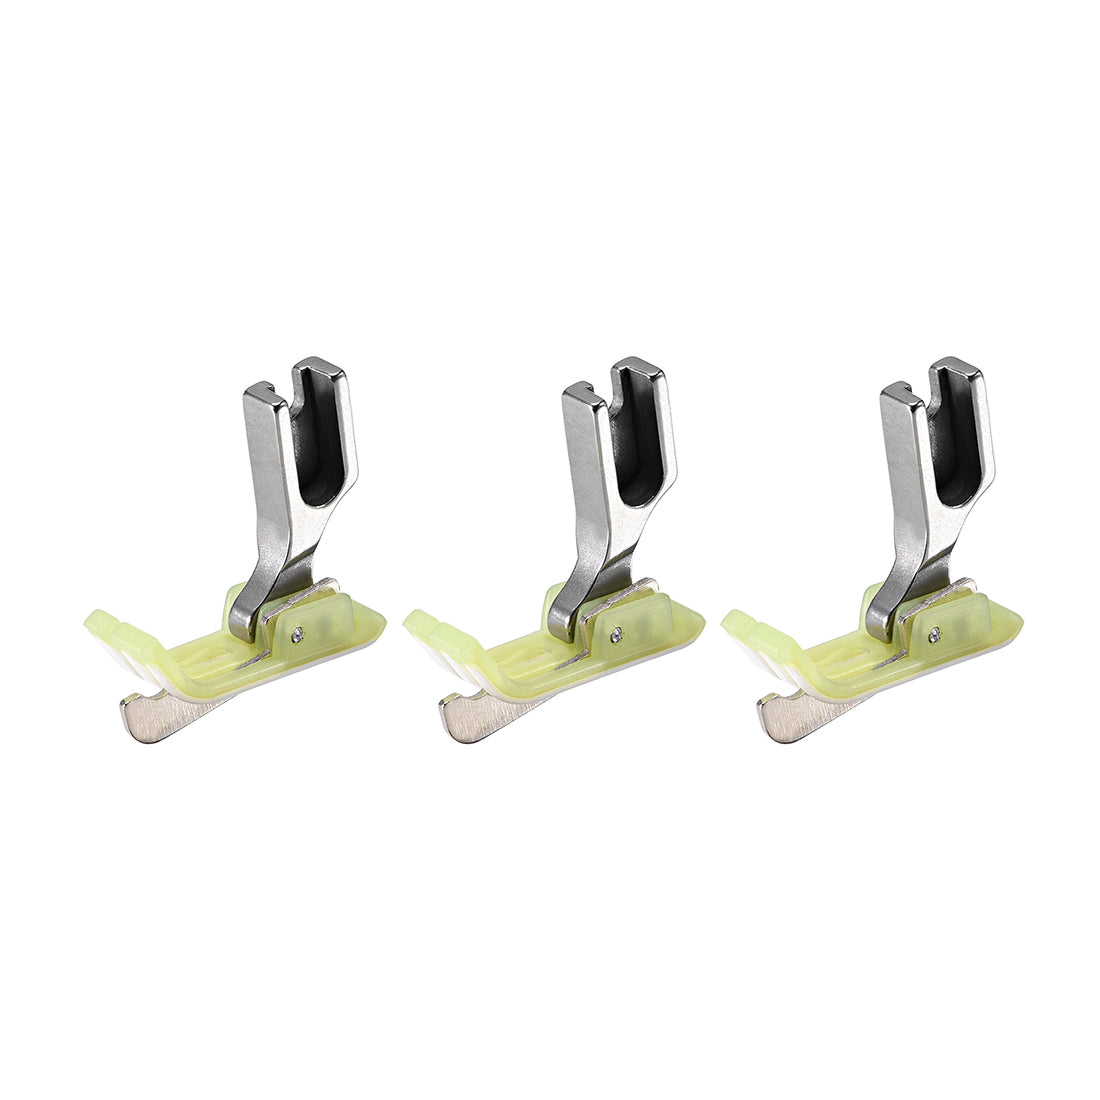 uxcell Uxcell #SP-18 Industrial Sewing Machine Hinged Presser Foot with Right Guide 1/8" (3mm) Green 3pcs